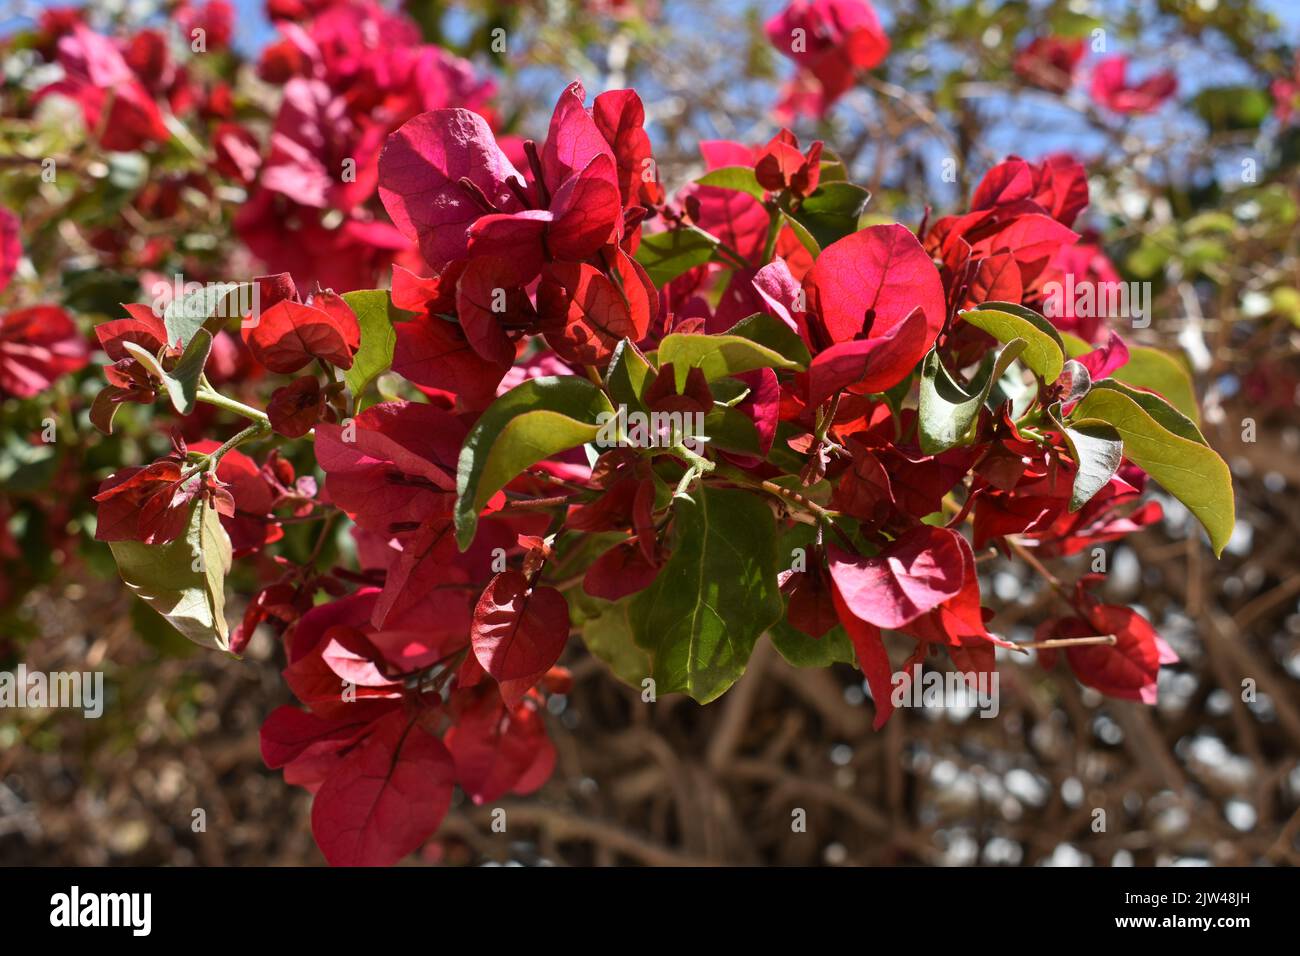 Red flowers of Bougainvillea  latin  name Bougainvillea  buttiana  known as 'Ratana Red' Stock Photo